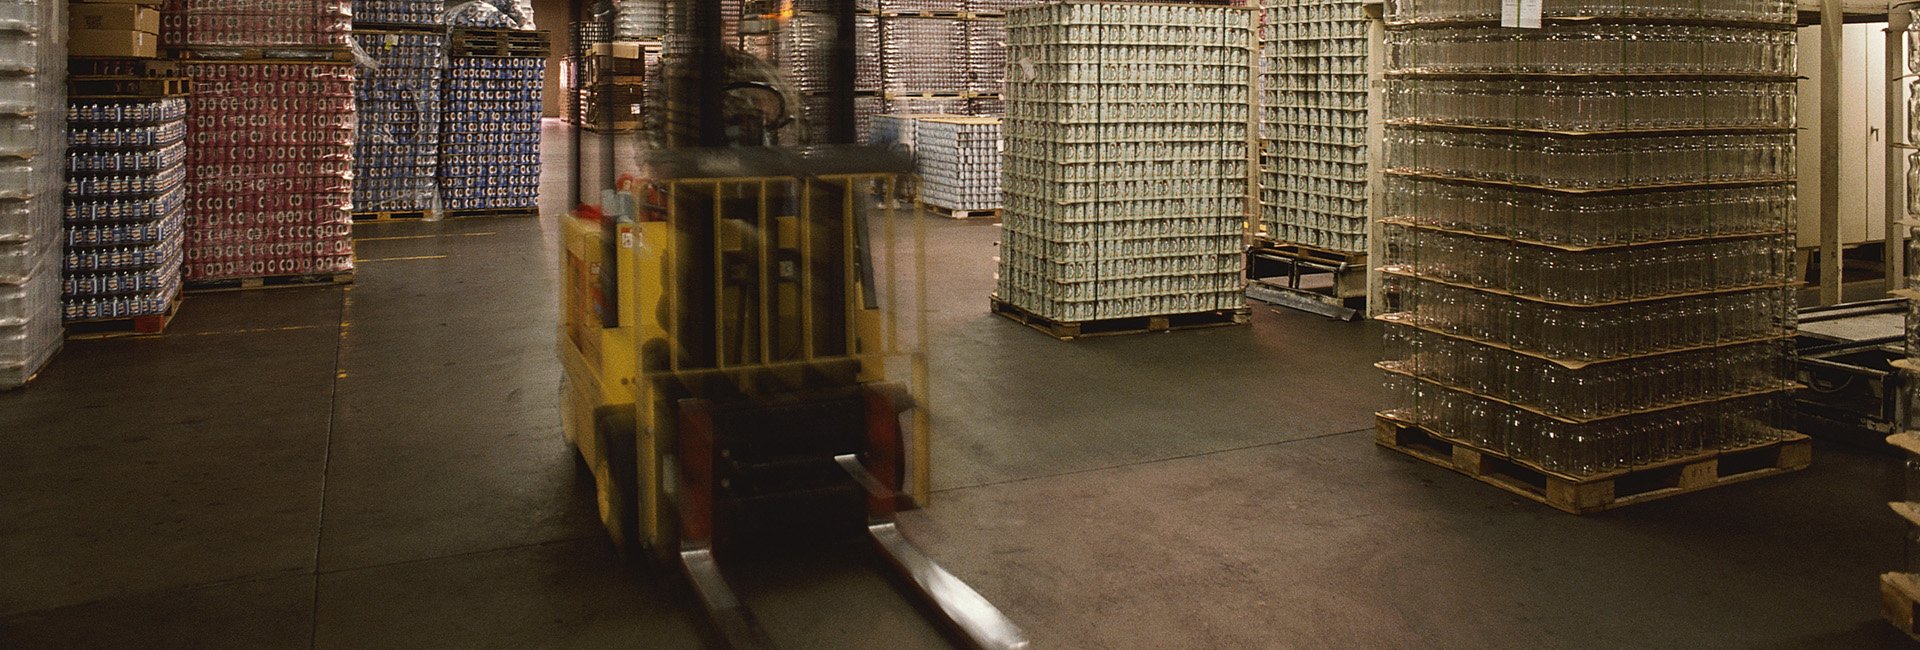 Forklift moving through a warehouse